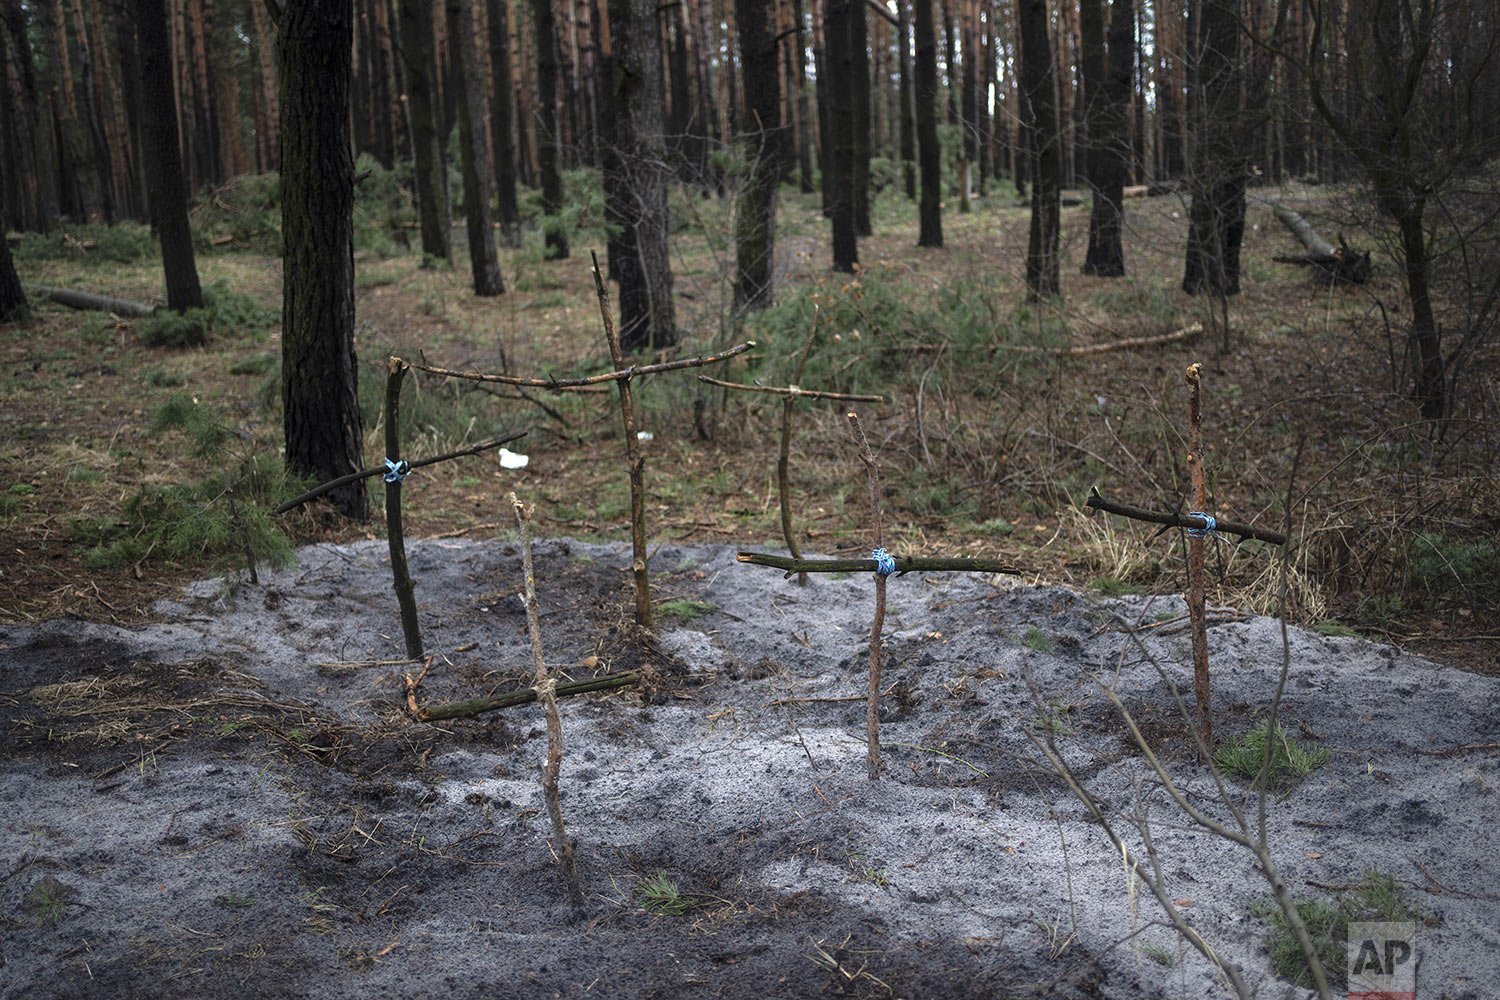  Crosses to honor civilians killed during fighting between Russian and Ukrainian forces, mark a mass grave in the forest of Irpin, on the outskirts of Kyiv, Ukraine, Saturday, April 2, 2022. (AP Photo/Rodrigo Abd) 